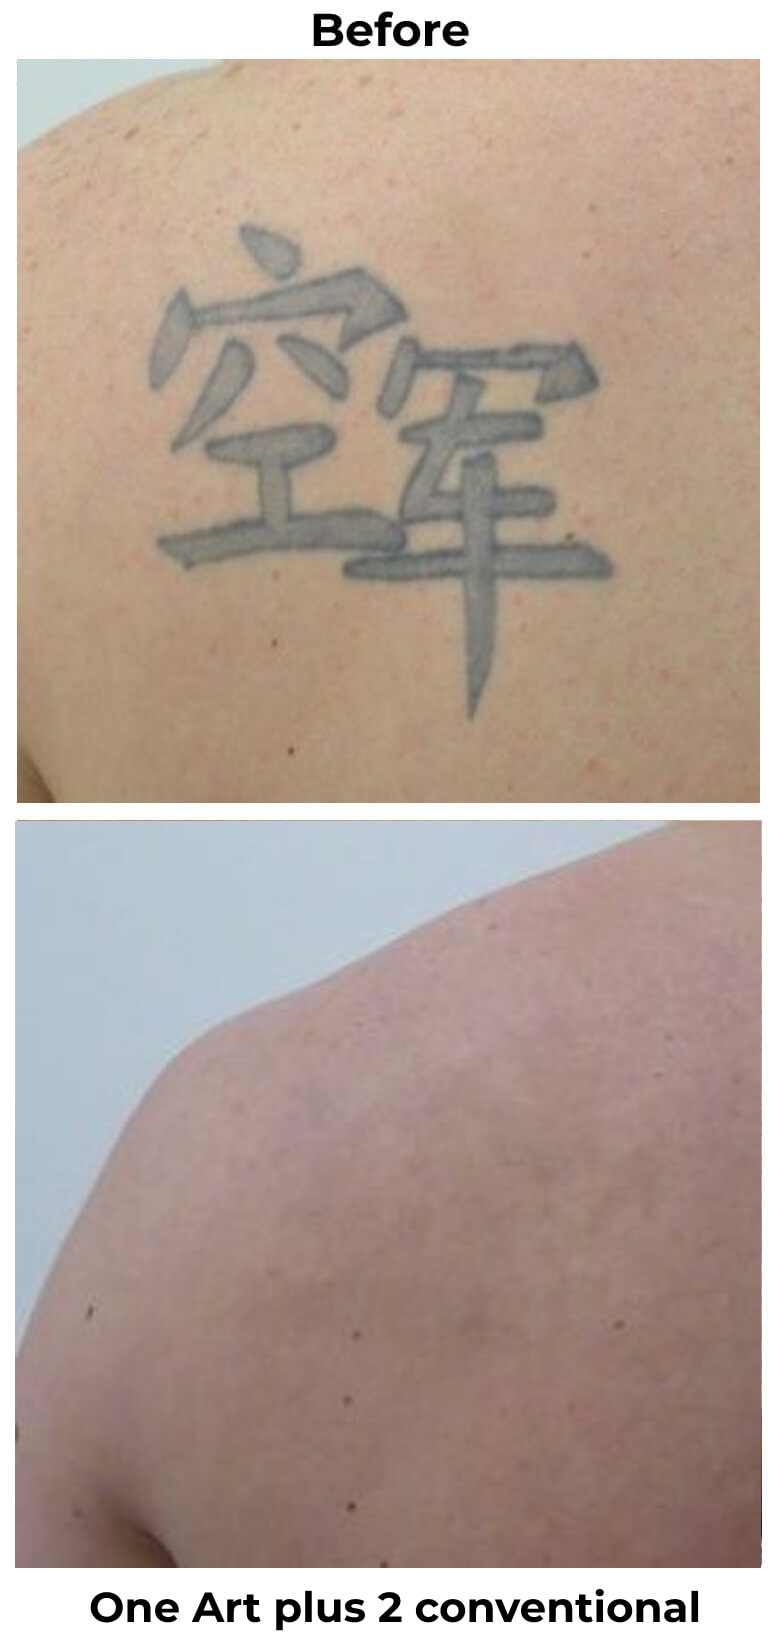 Shoulders Tattoo Removal in weeks not in years